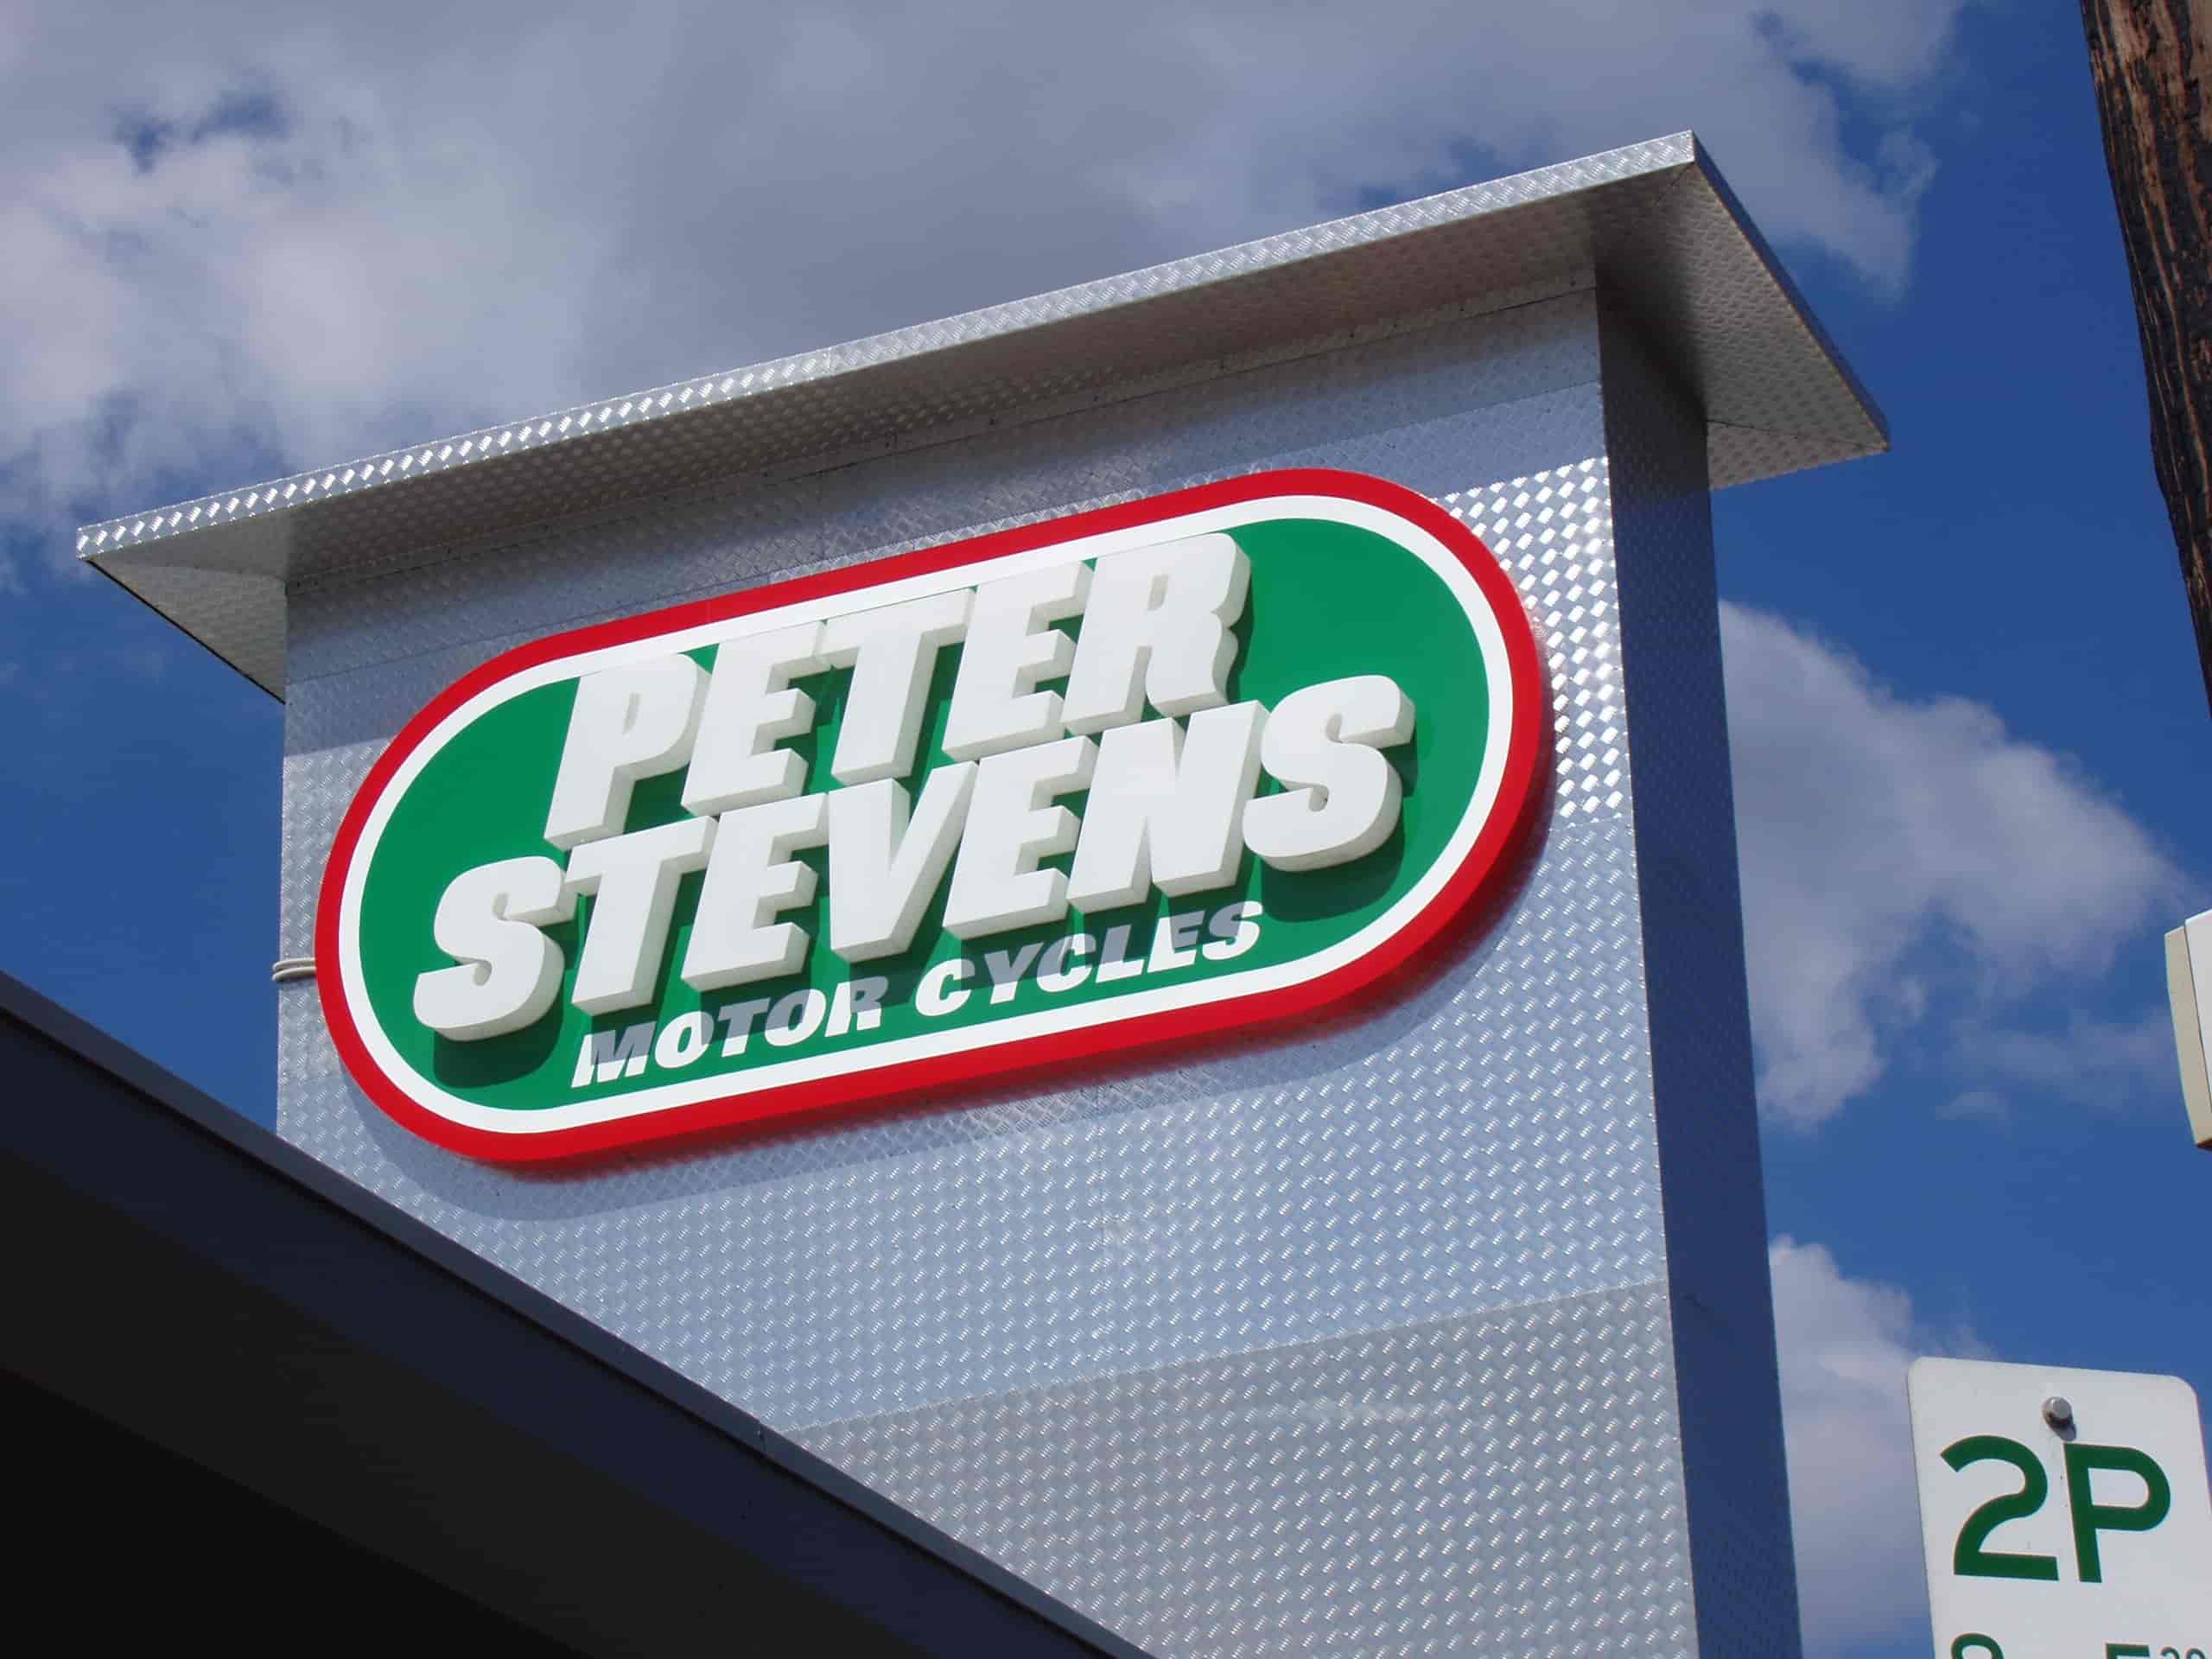 peter Stevens Motorcycles Signage outdoor